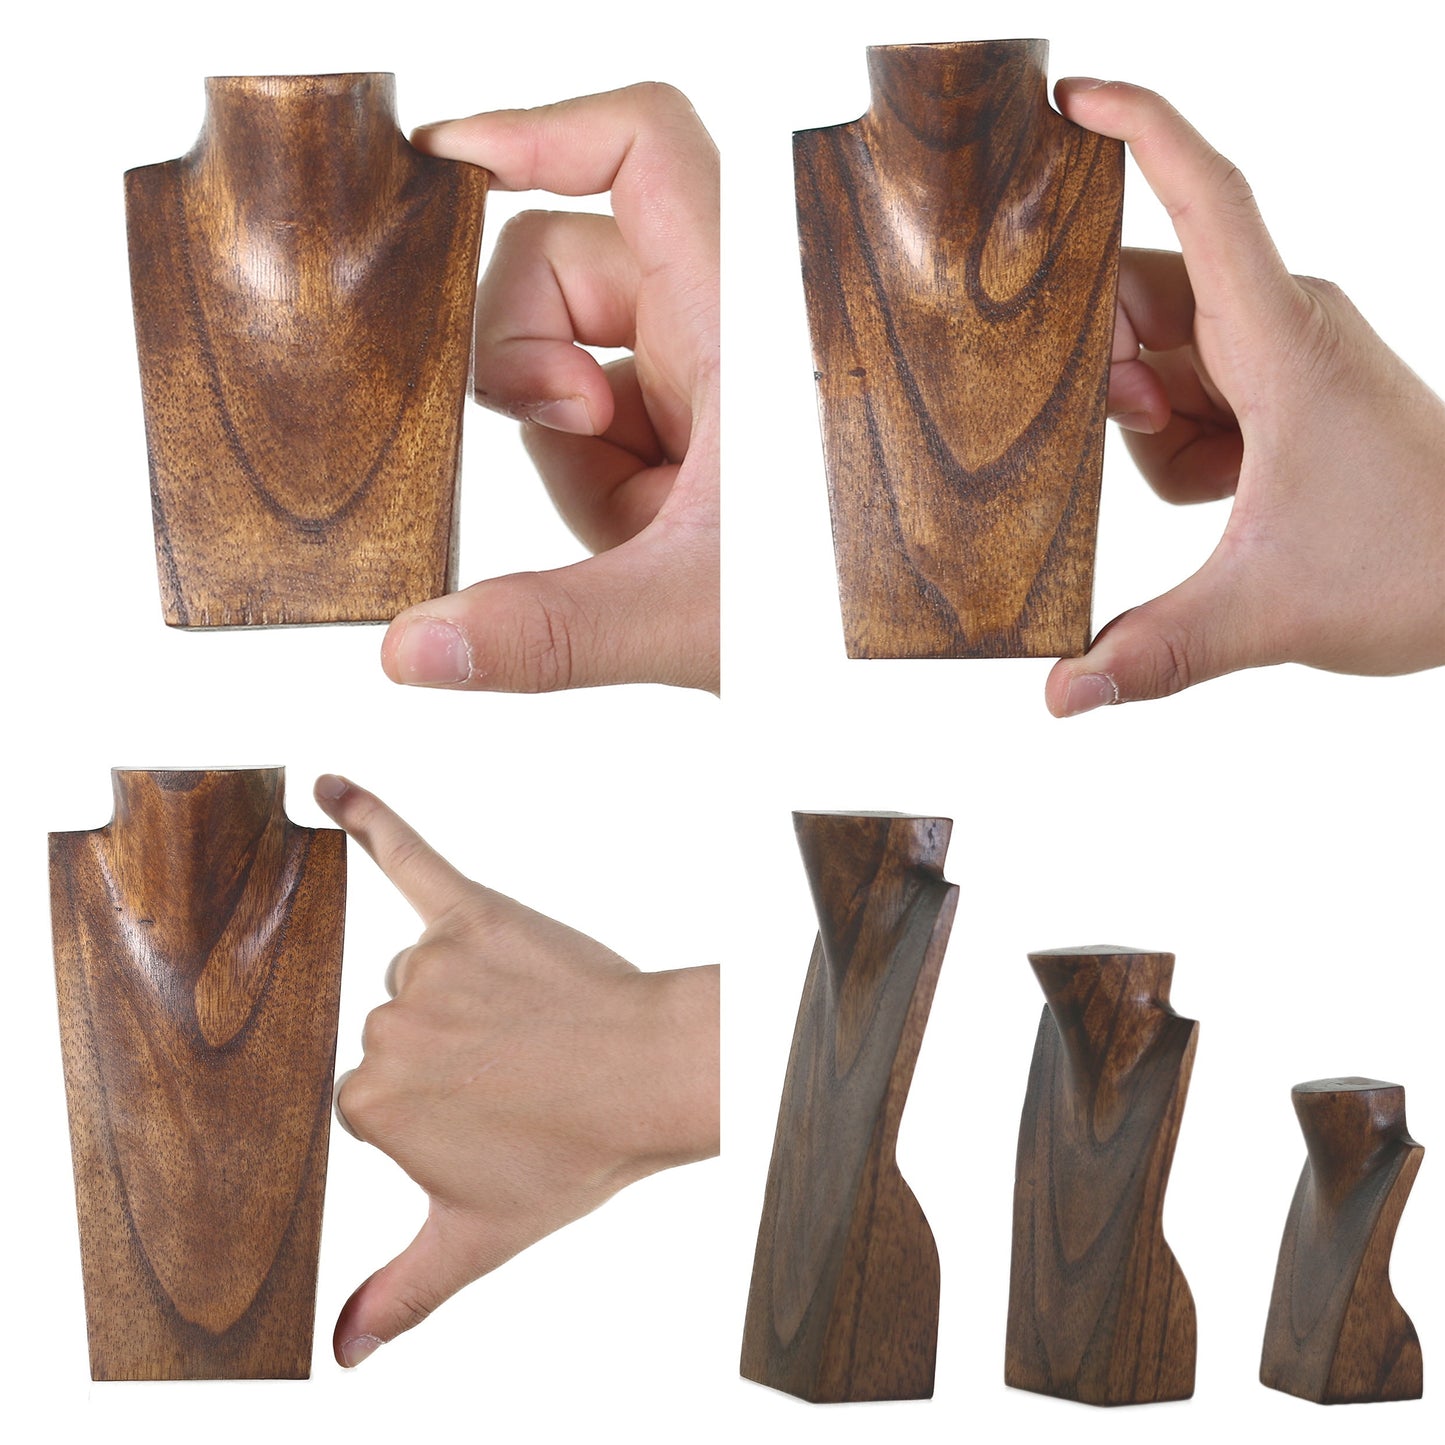 a series of photos showing different angles of a wooden object